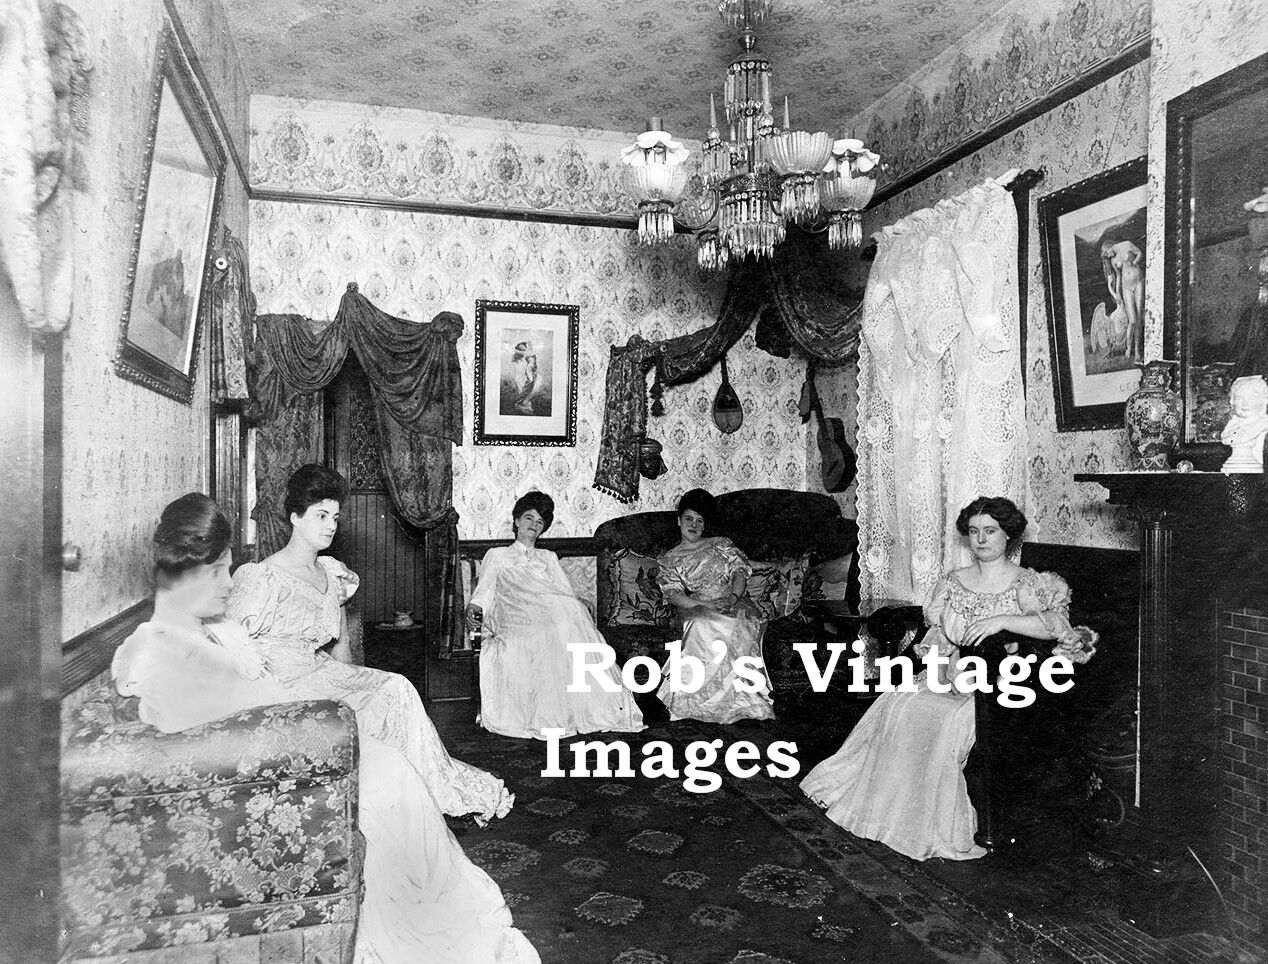 Klondike Old West Photo  Climax Parlor House Brothel Girls Soiled Doves 1898